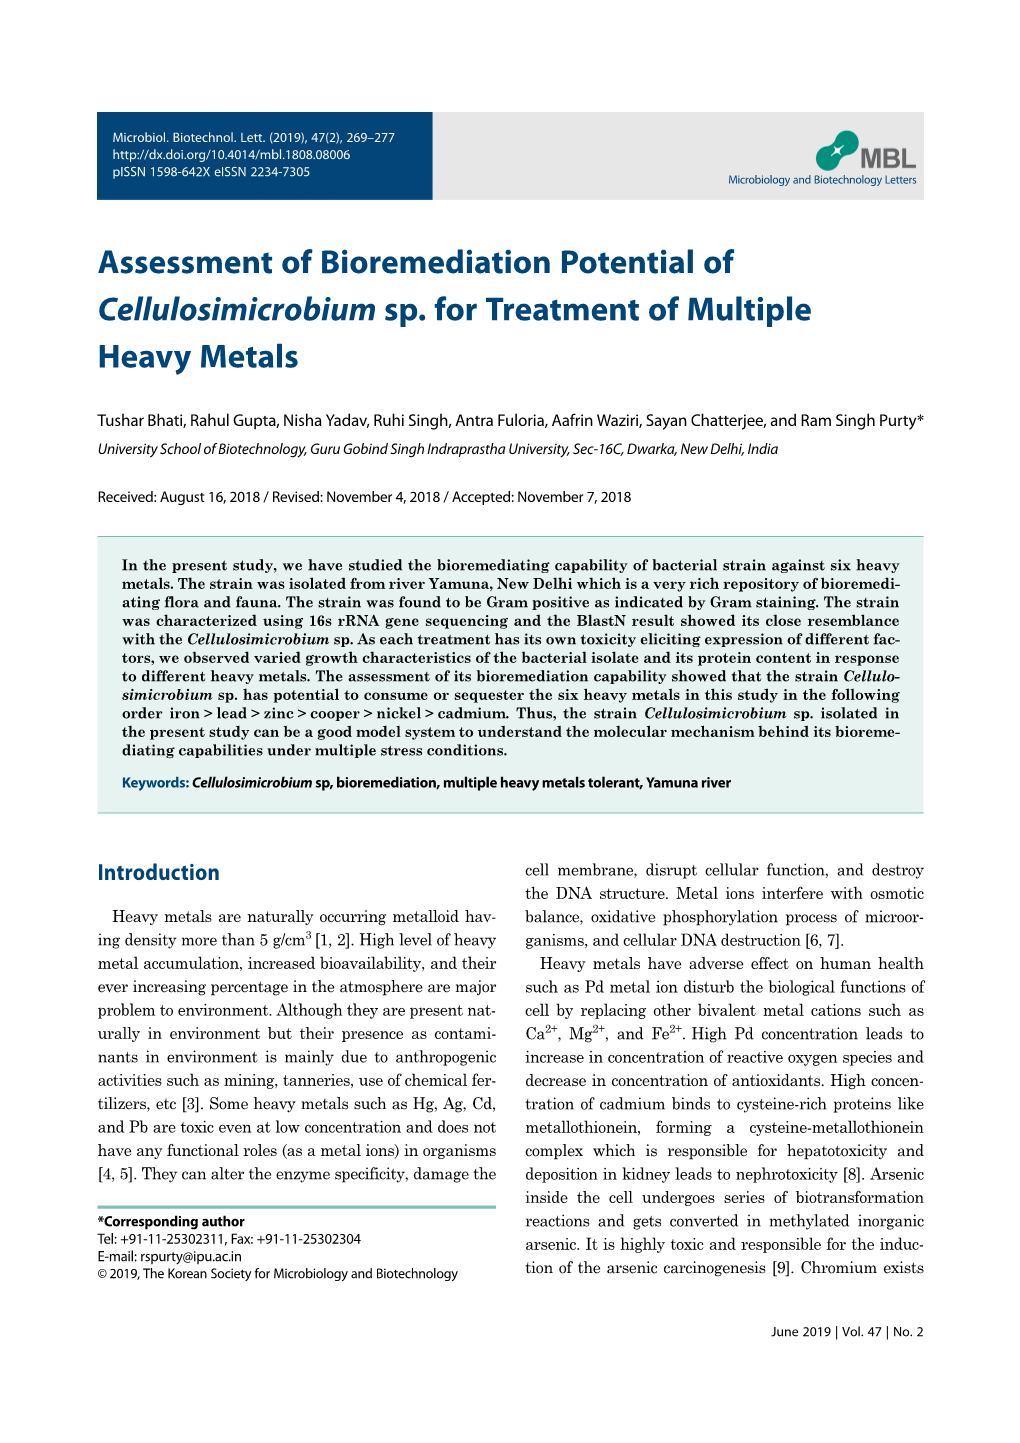 Assessment of Bioremediation Potential of Cellulosimicrobium Sp